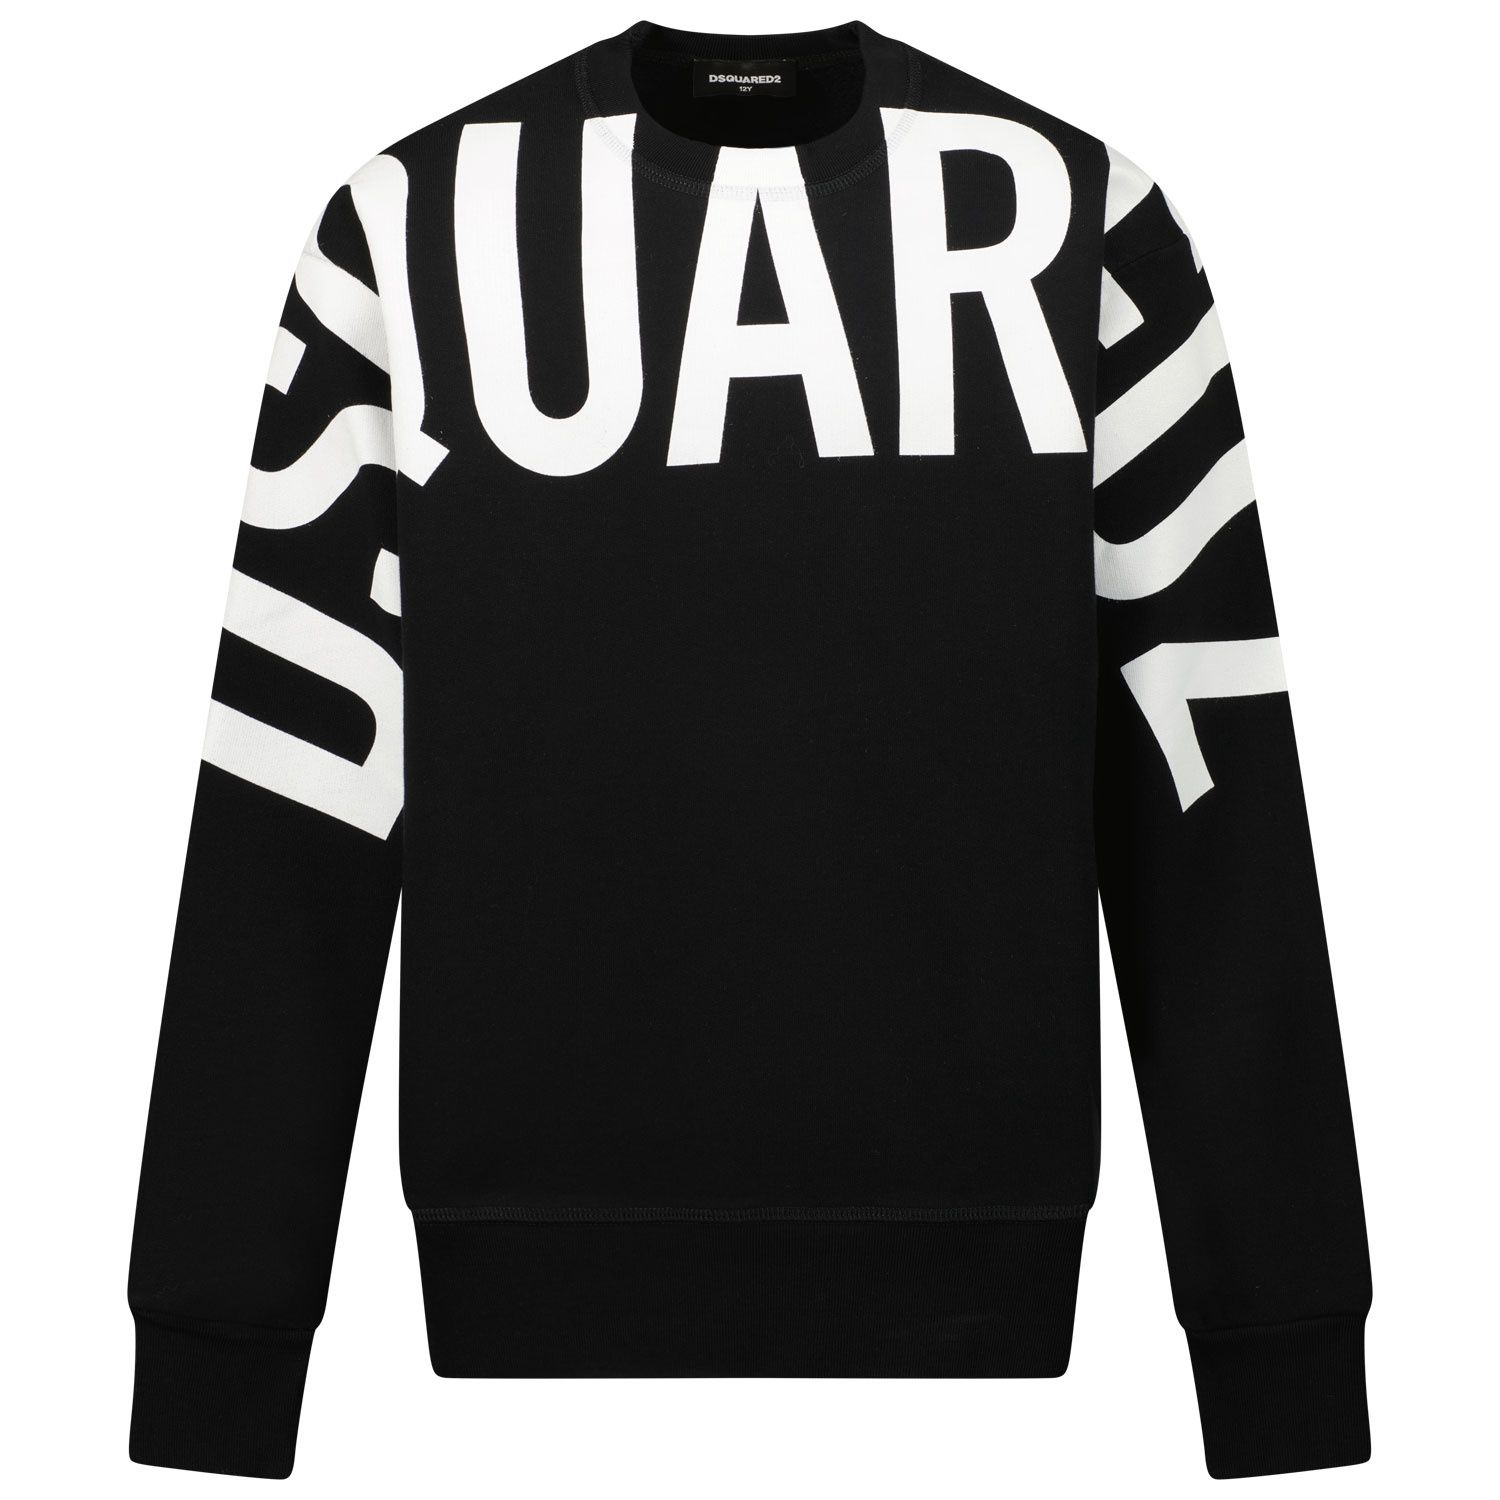 Picture of Dsquared2 DQ0537 kids sweater black